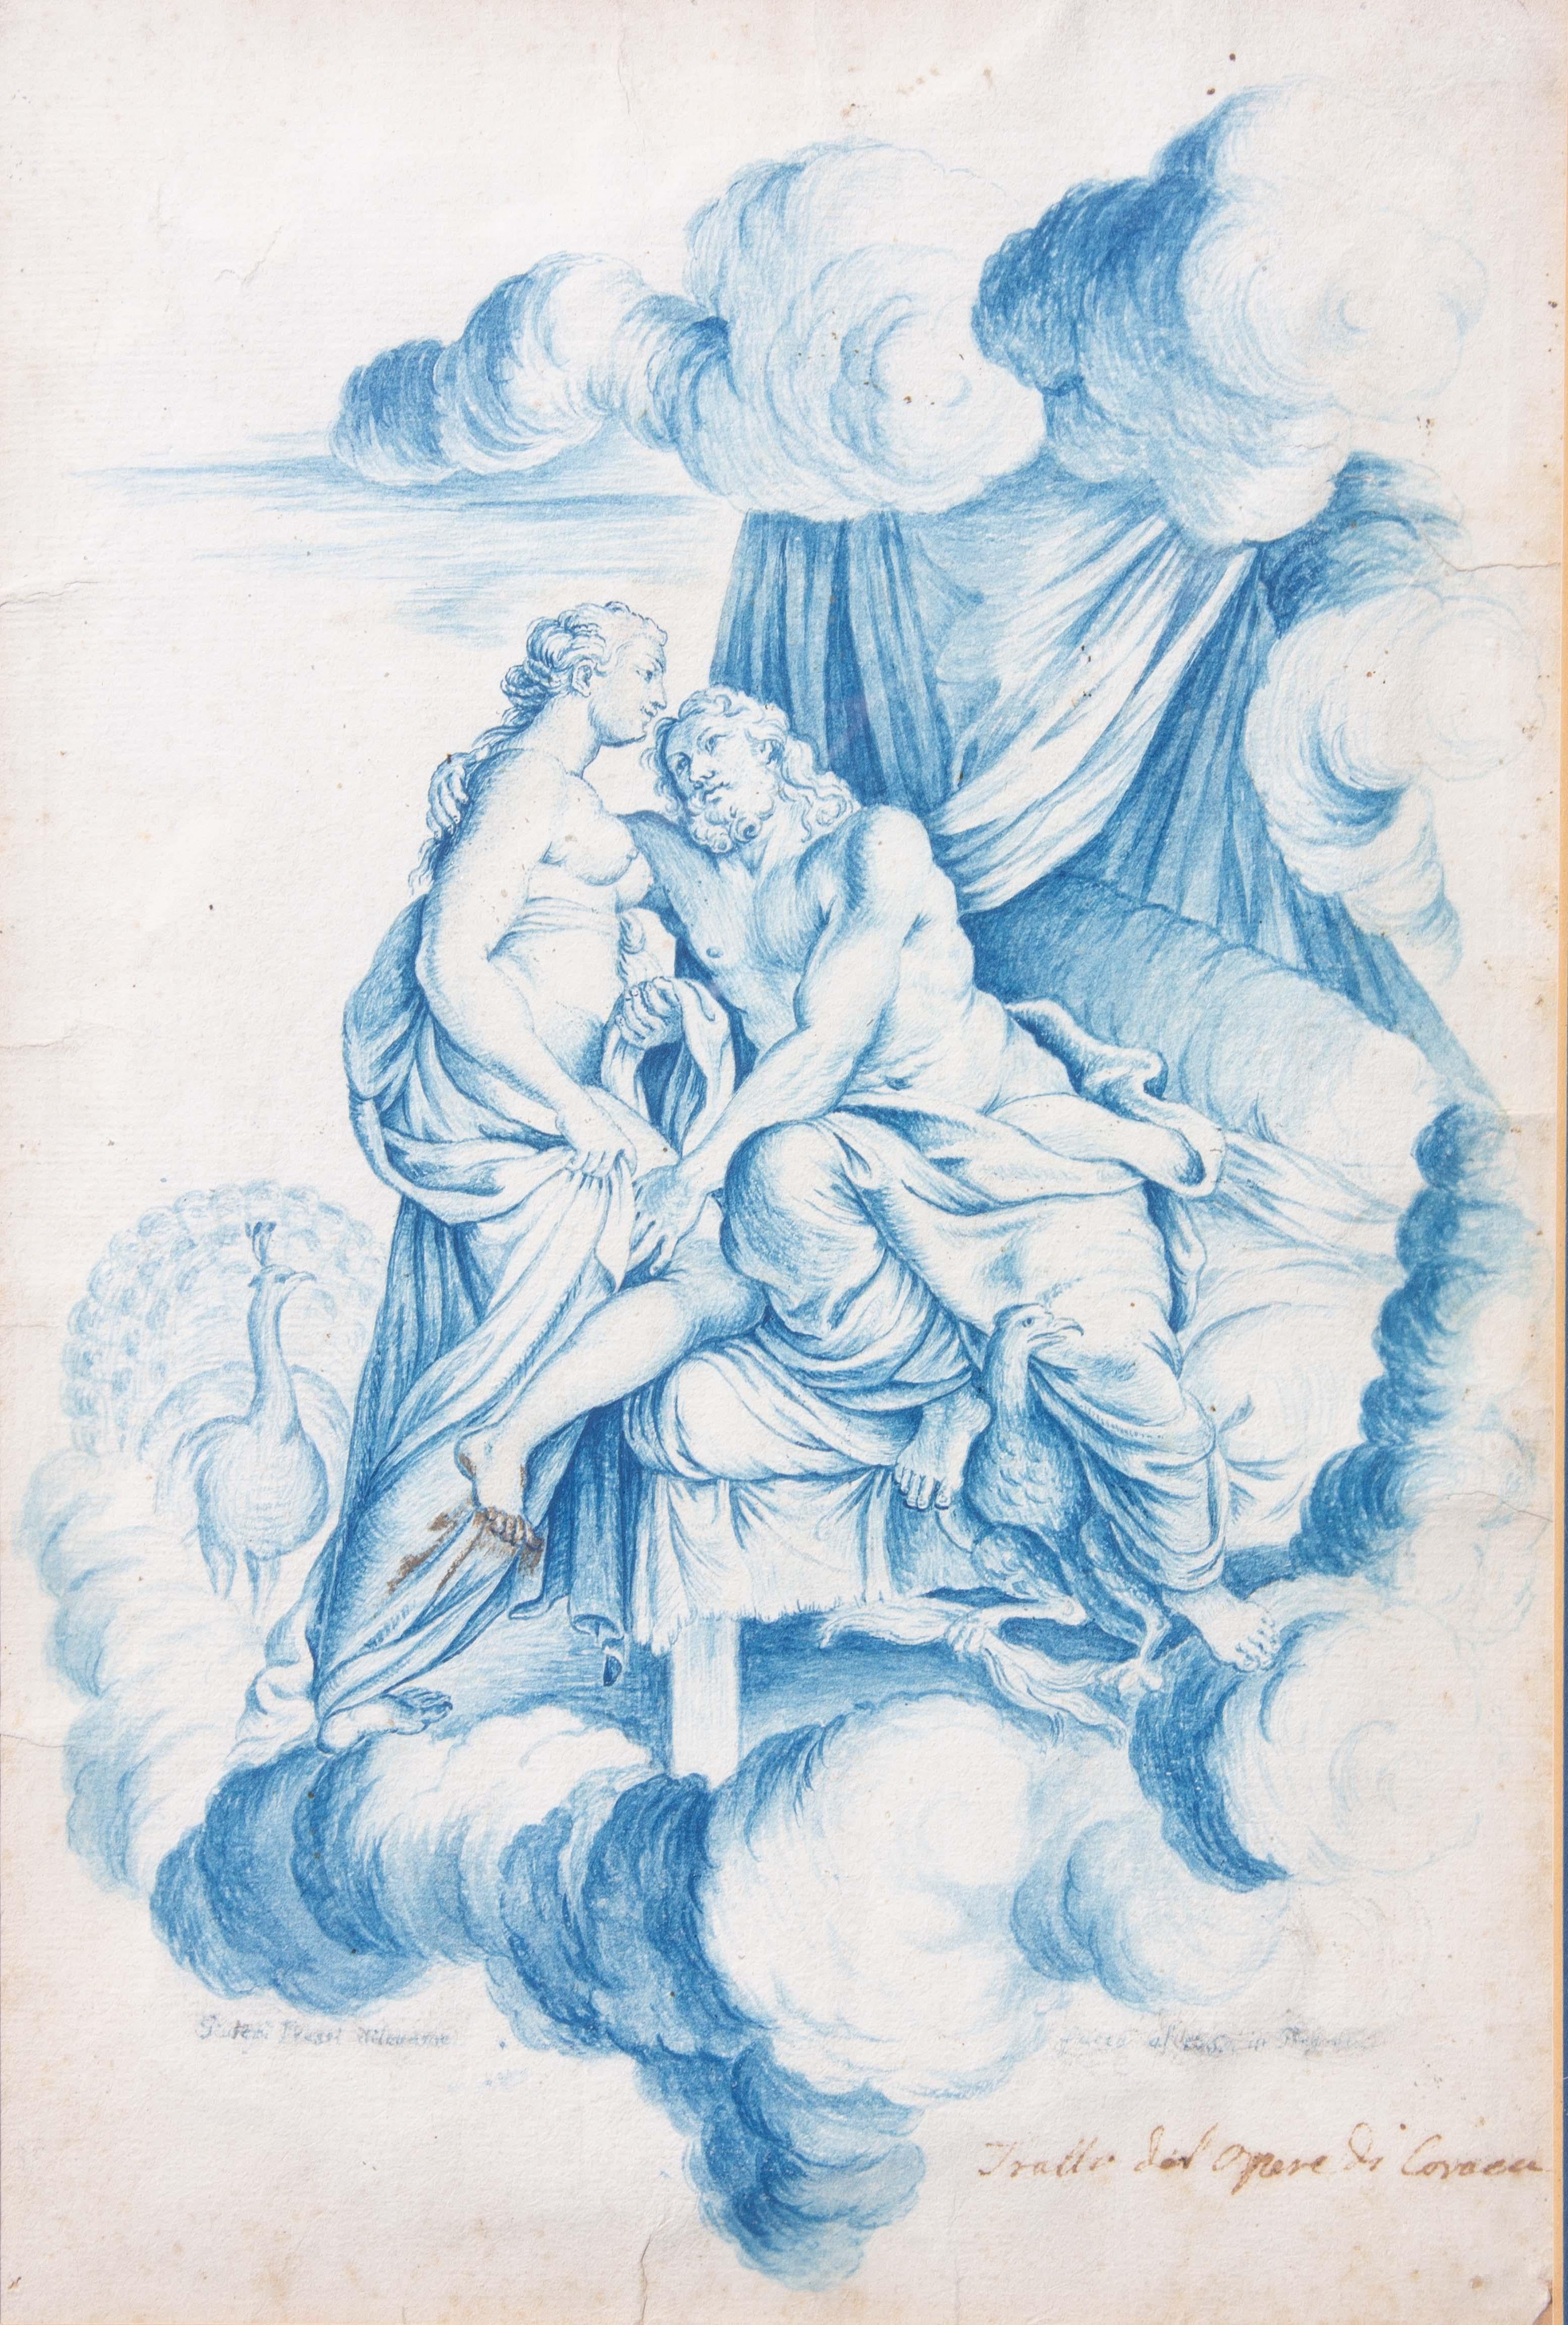 18th century very fine depiction of Hera and Zeus after the master work by Annibale Carracci, Jupiter et Junon. Vivid blue color wash on laid paper. Illegible inscription lower. Measures: 13 3/4